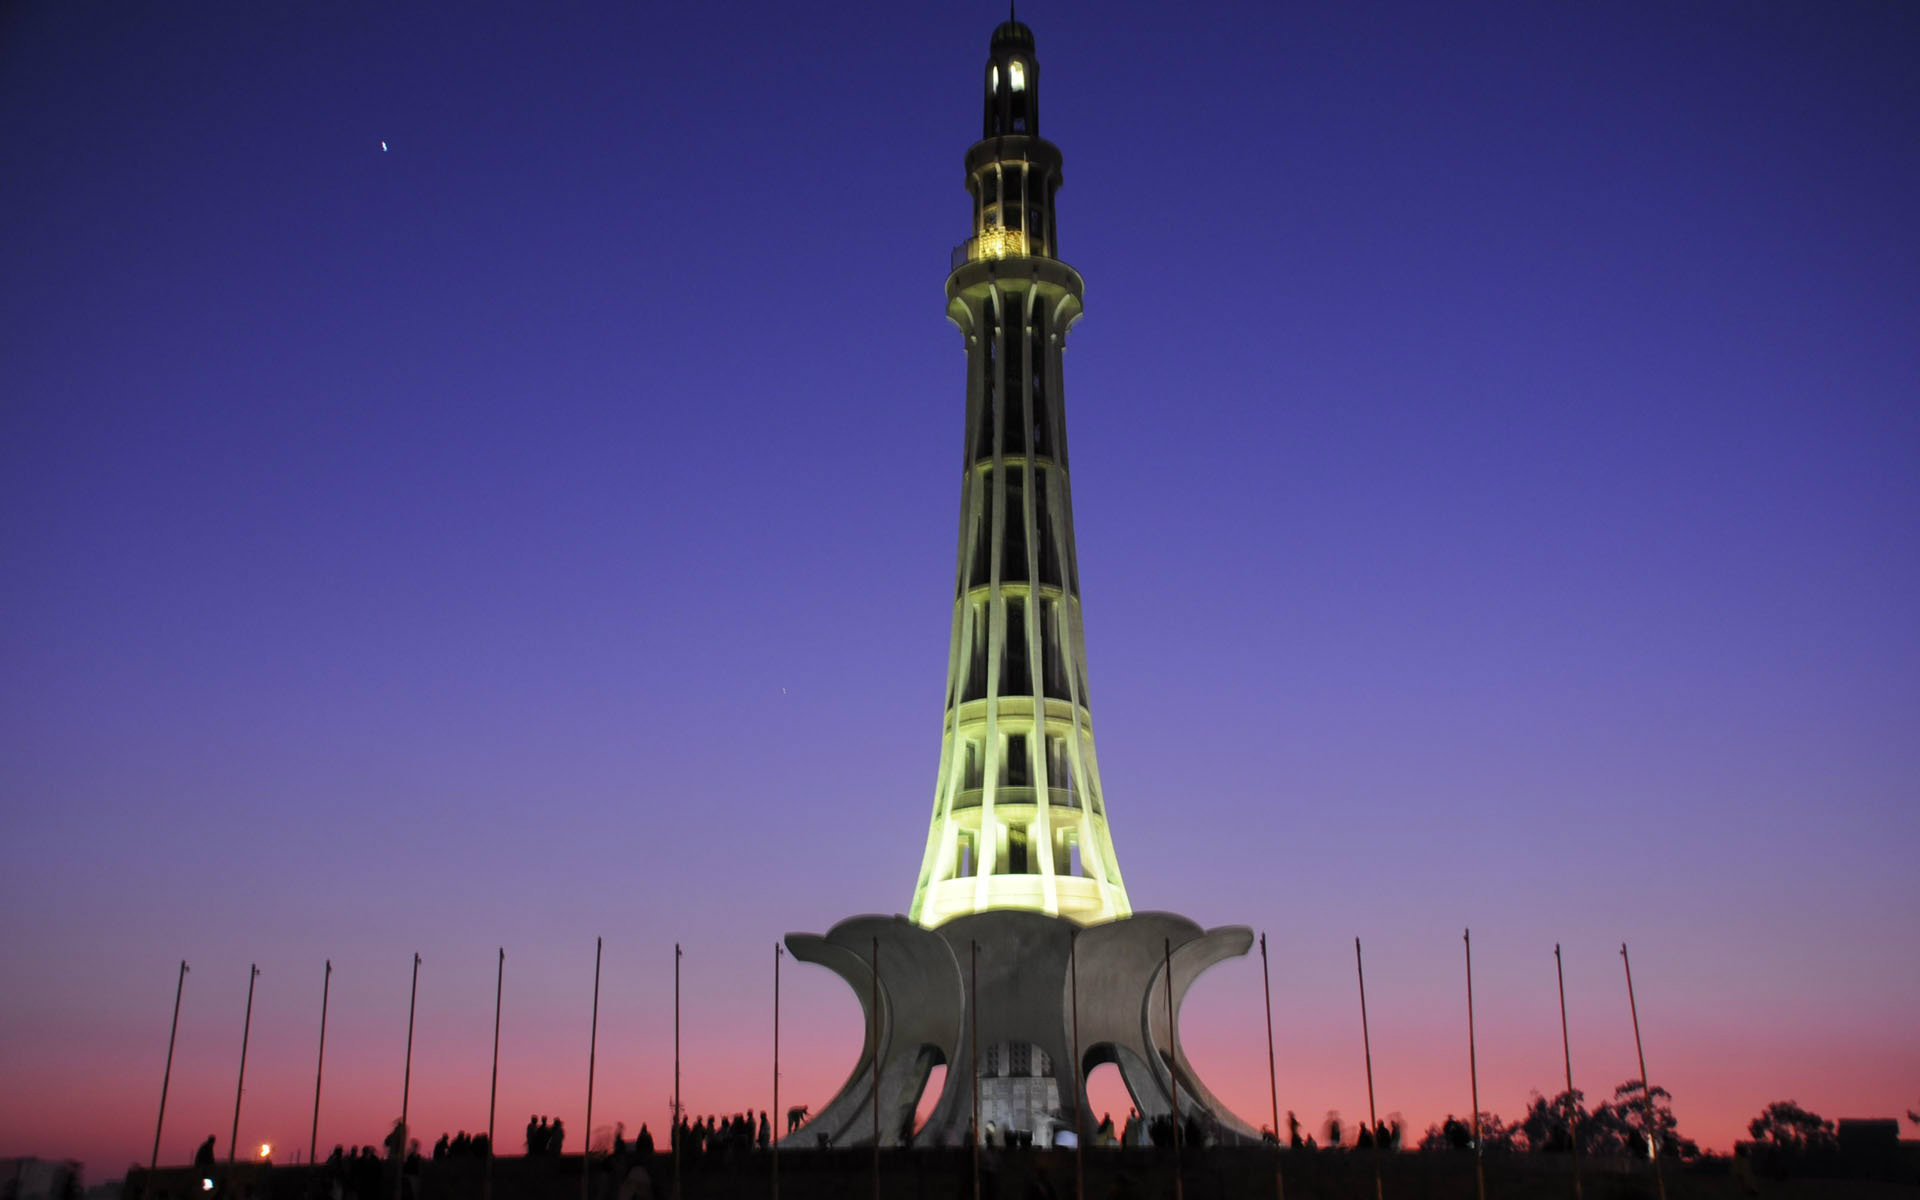 100% Quality Pakistan Hd Wallpapers, Px - Lahore Minare Pakistan , HD Wallpaper & Backgrounds